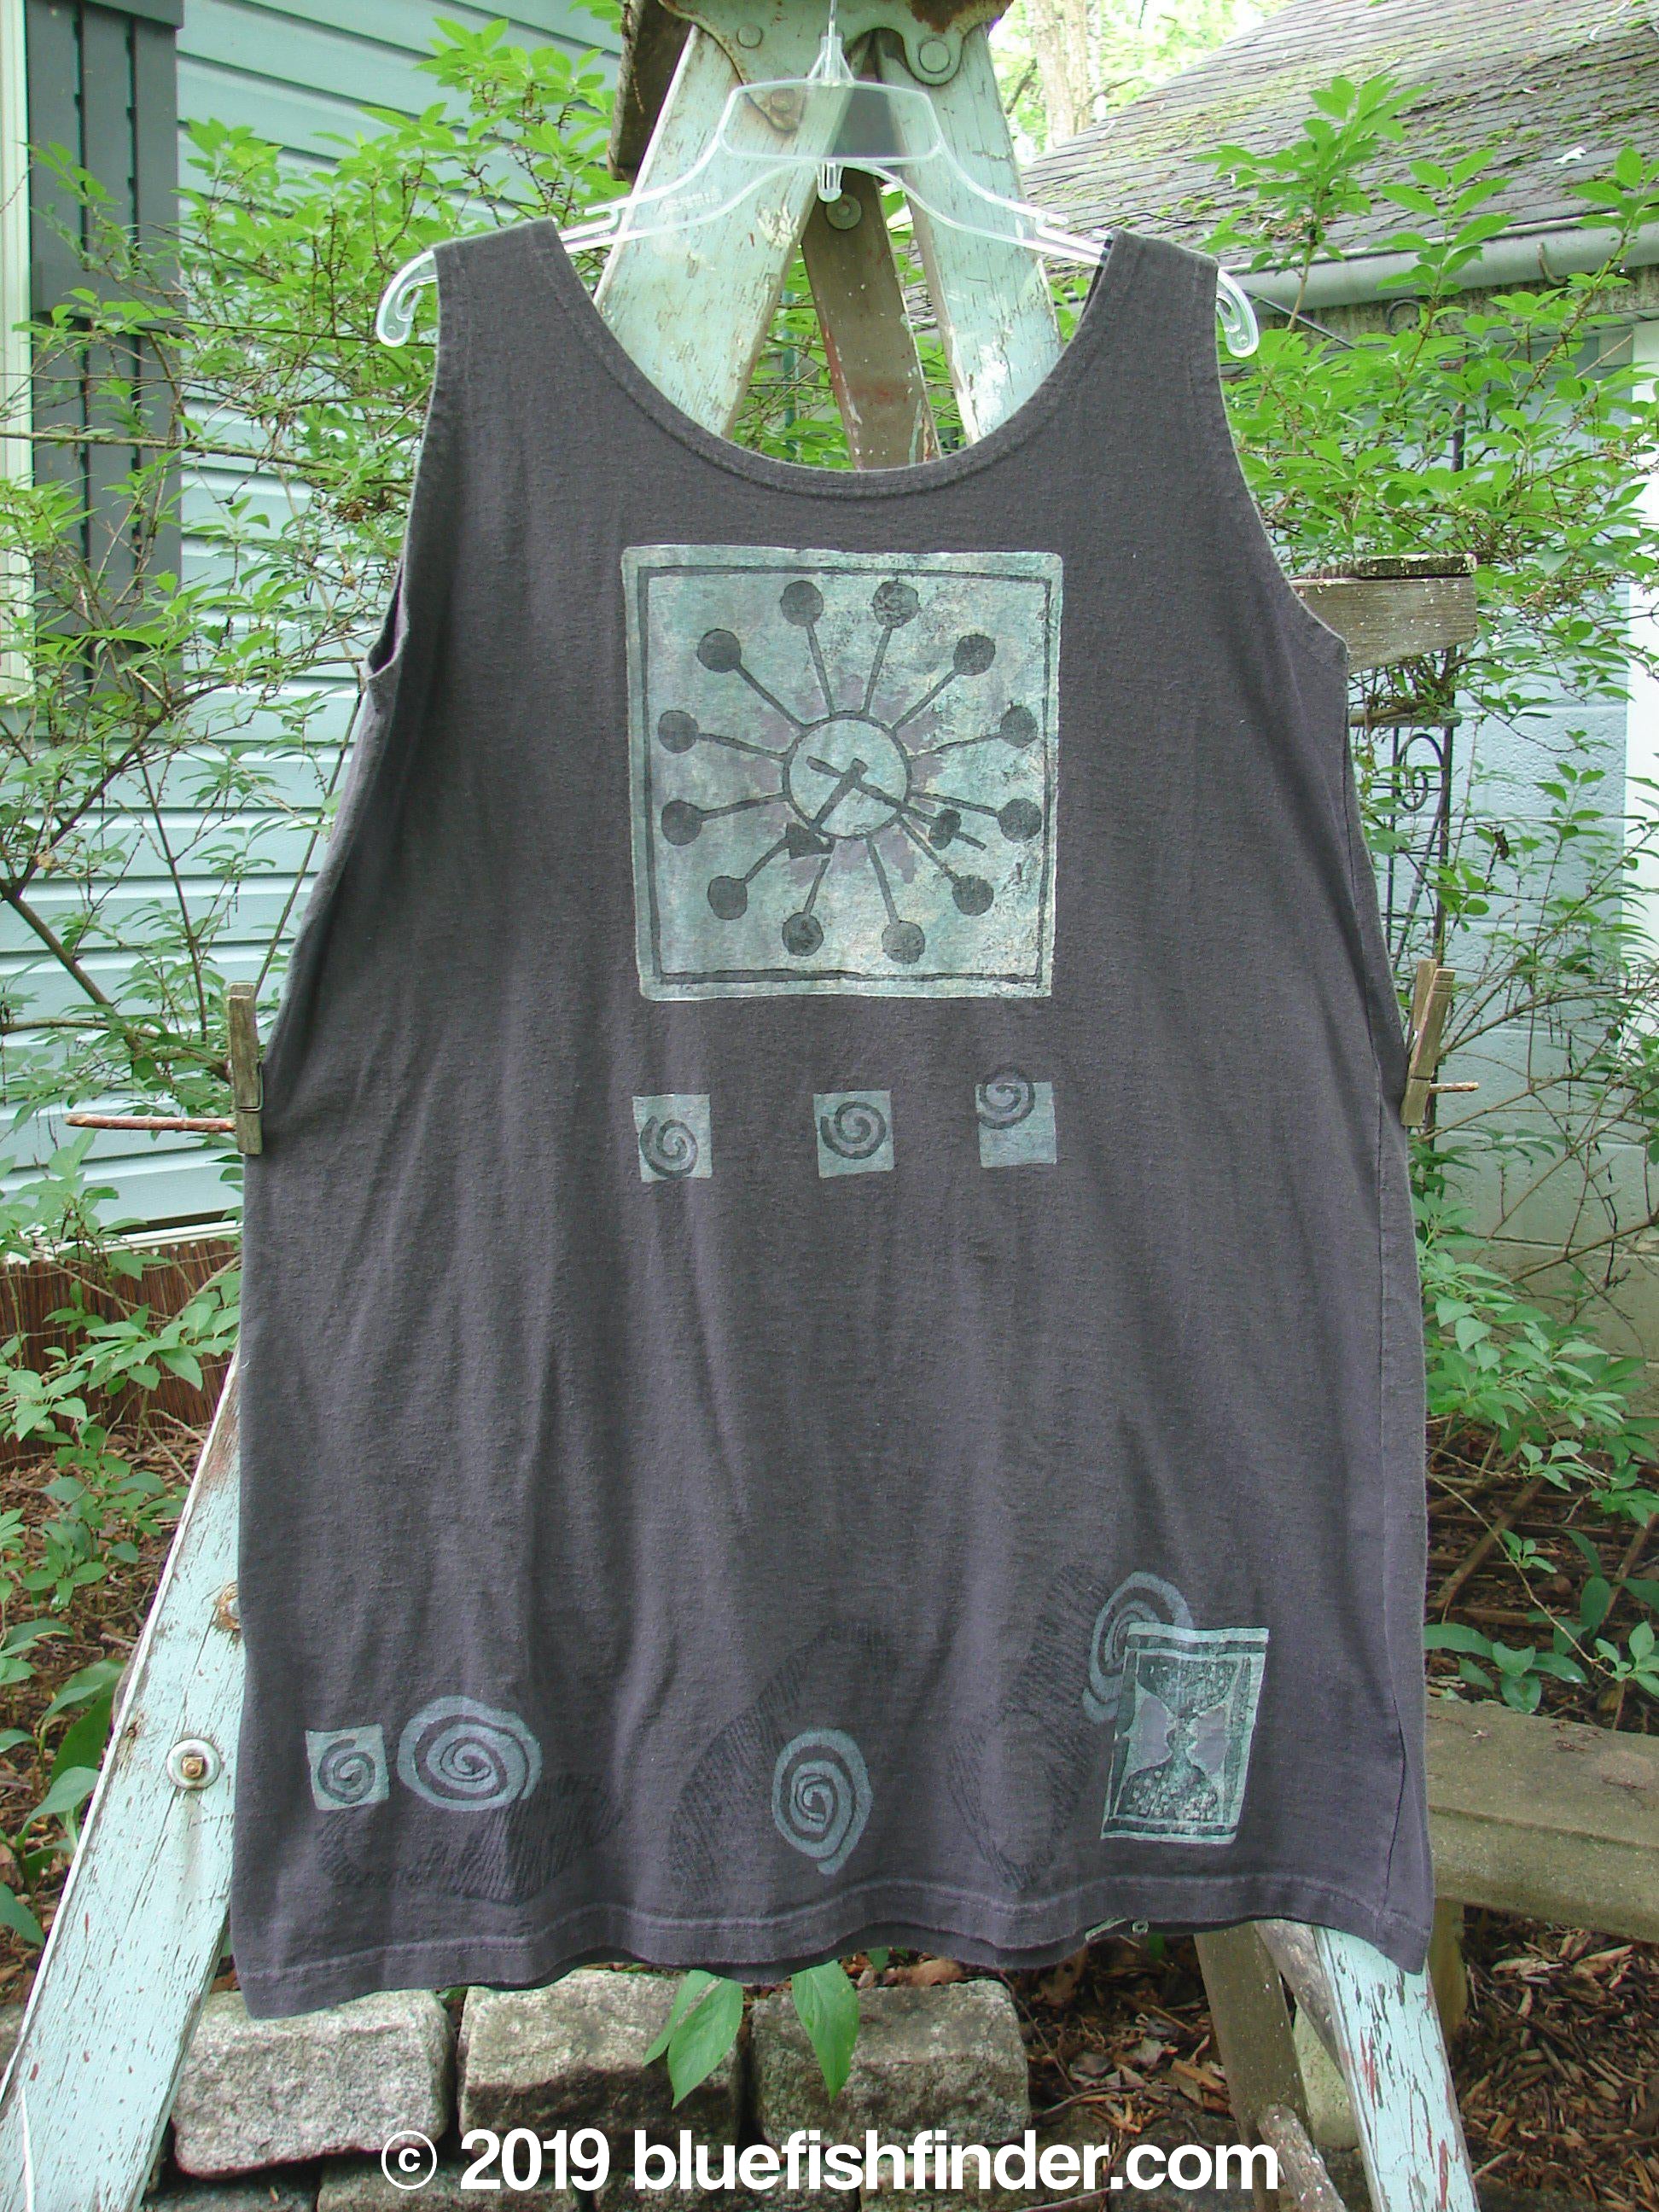 Image alt text: "1995 Sun Glint Tank with a square design on grey fabric, featuring a scoop neckline and Blue Fish patch"